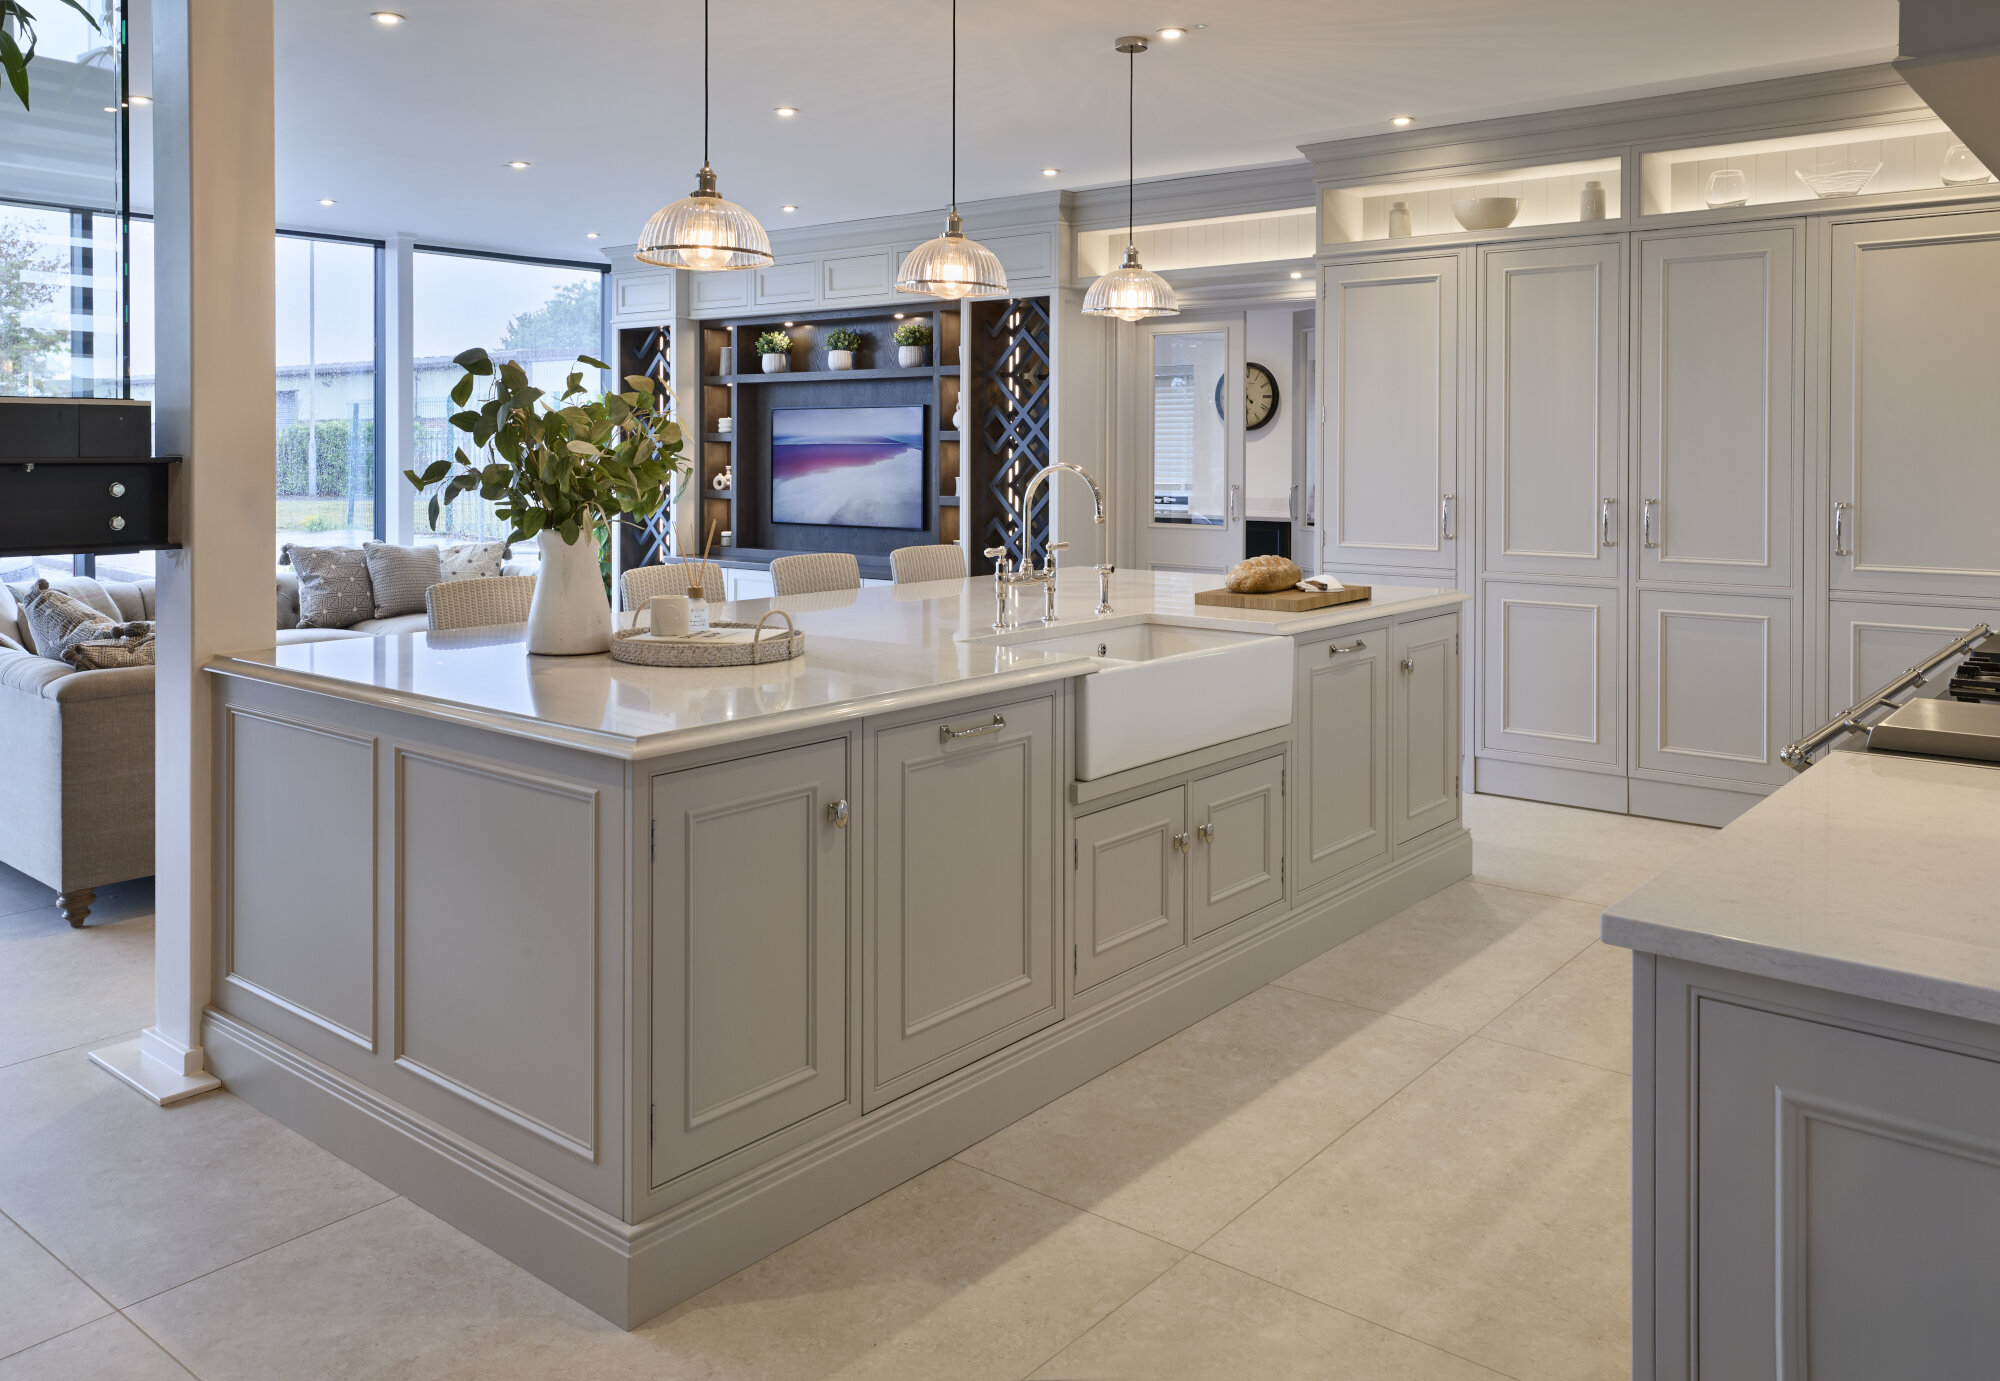 This Bespoke Kitchen Design is on display in our showroom near North Hykeham